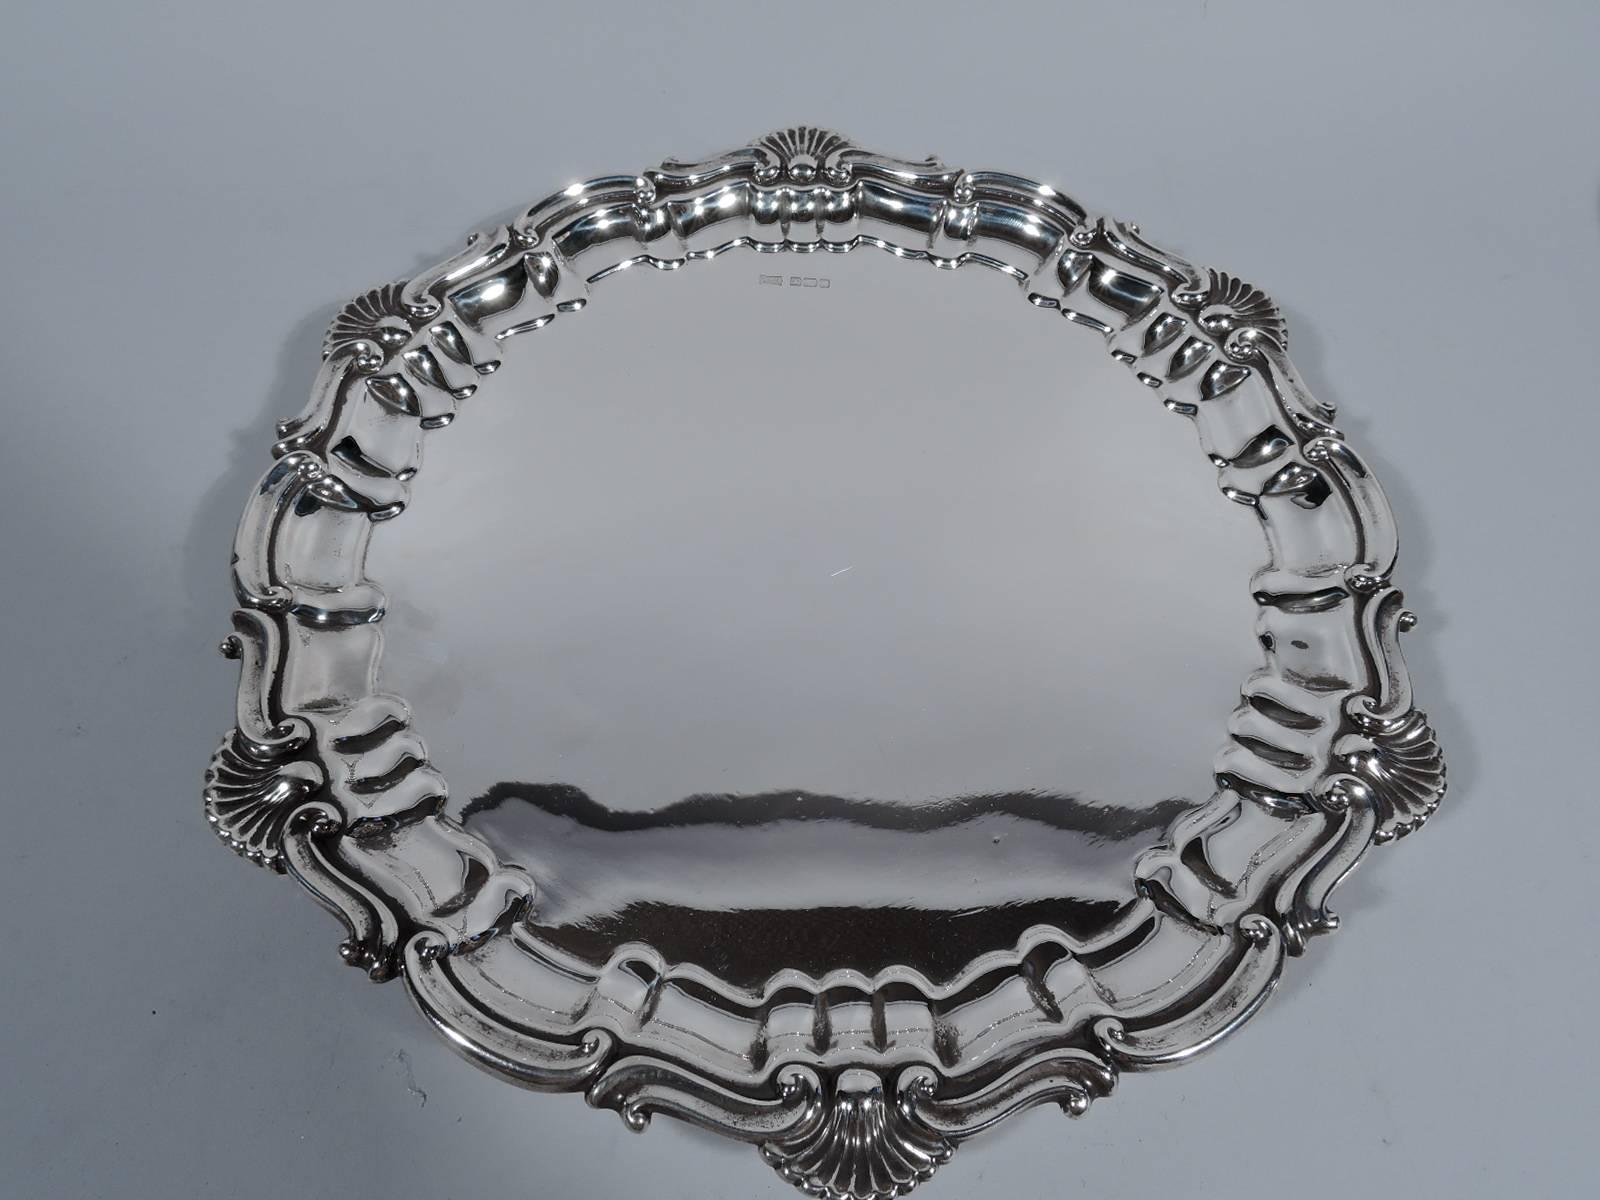 George V sterling silver salver. Made by Walker & Hall in Sheffield in 1916. Circular with tapering sides and molded rim: alternating s- and c-scrolls interspersed with scallop shells. Rests on three scrolled supports. Hallmarked. Weight: 17.5 troy